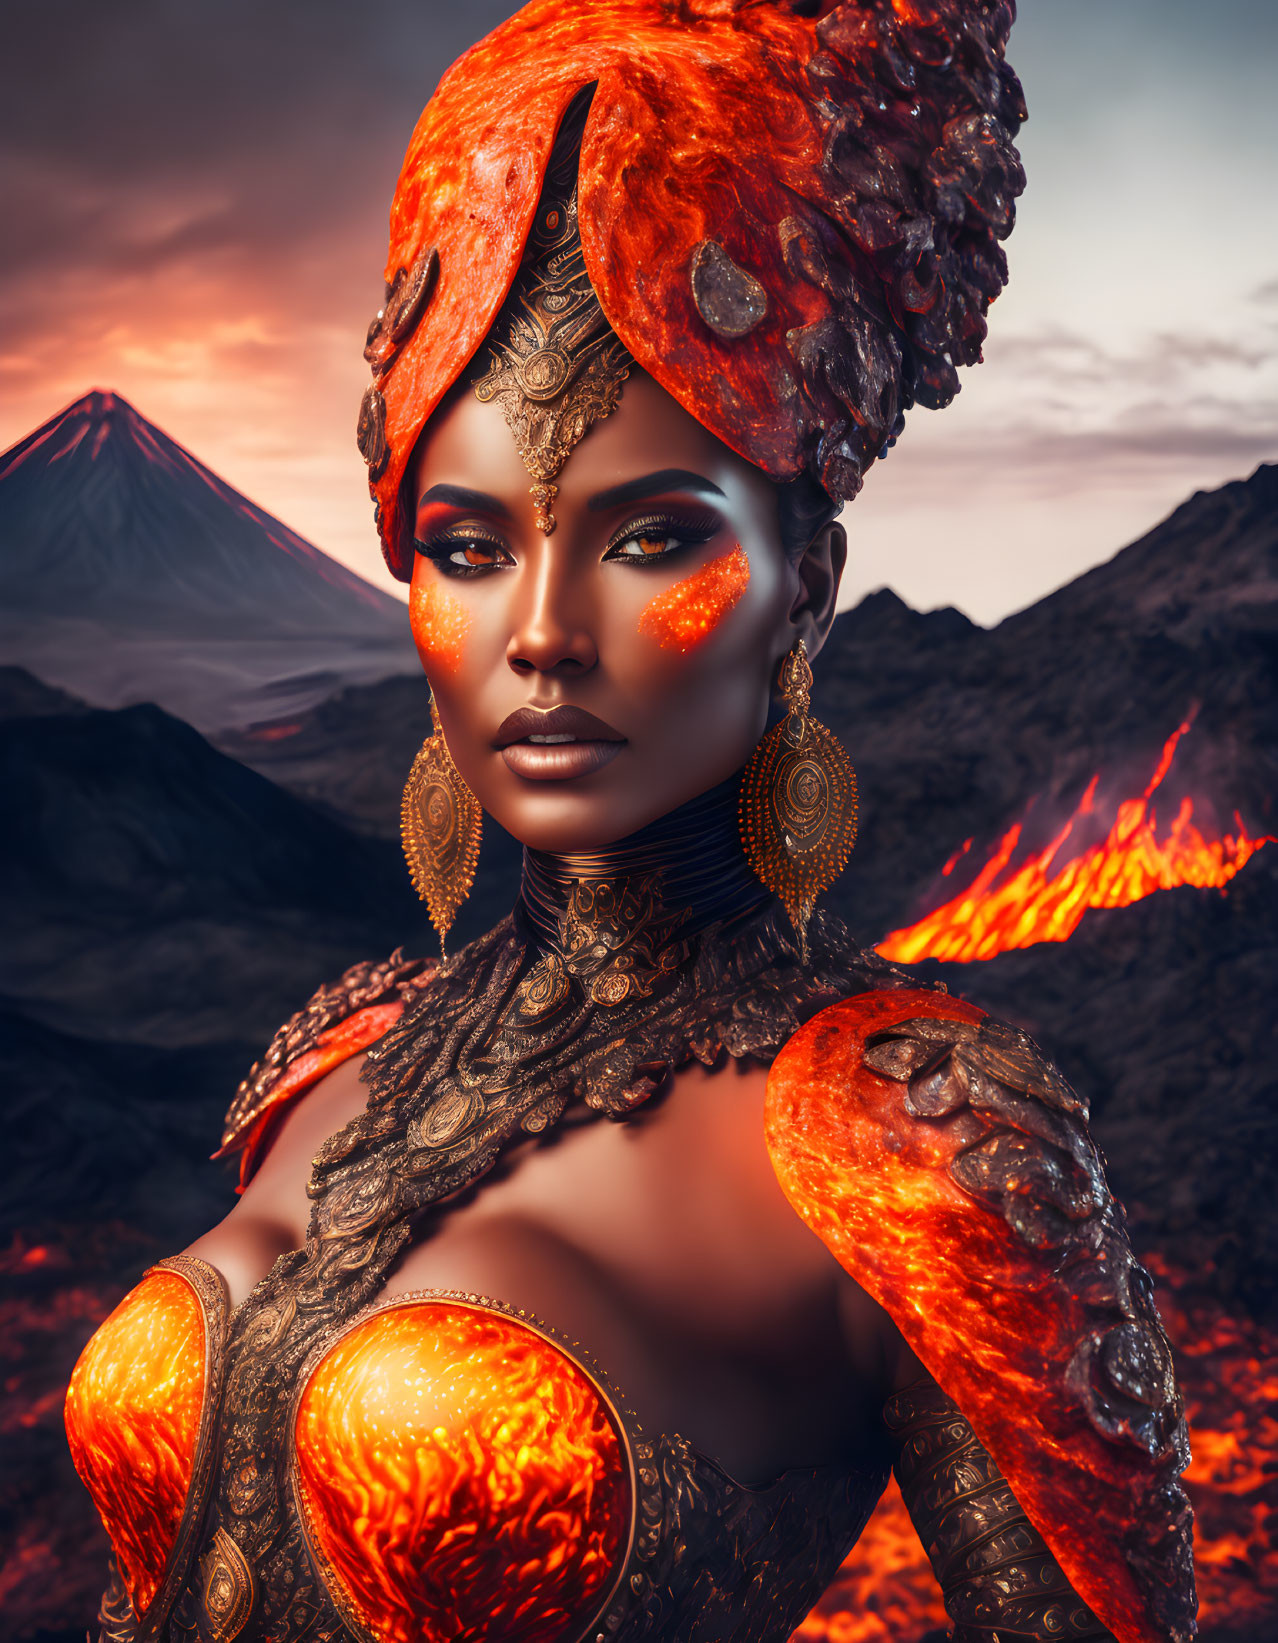 Portrait of woman with fiery makeup in volcanic landscape